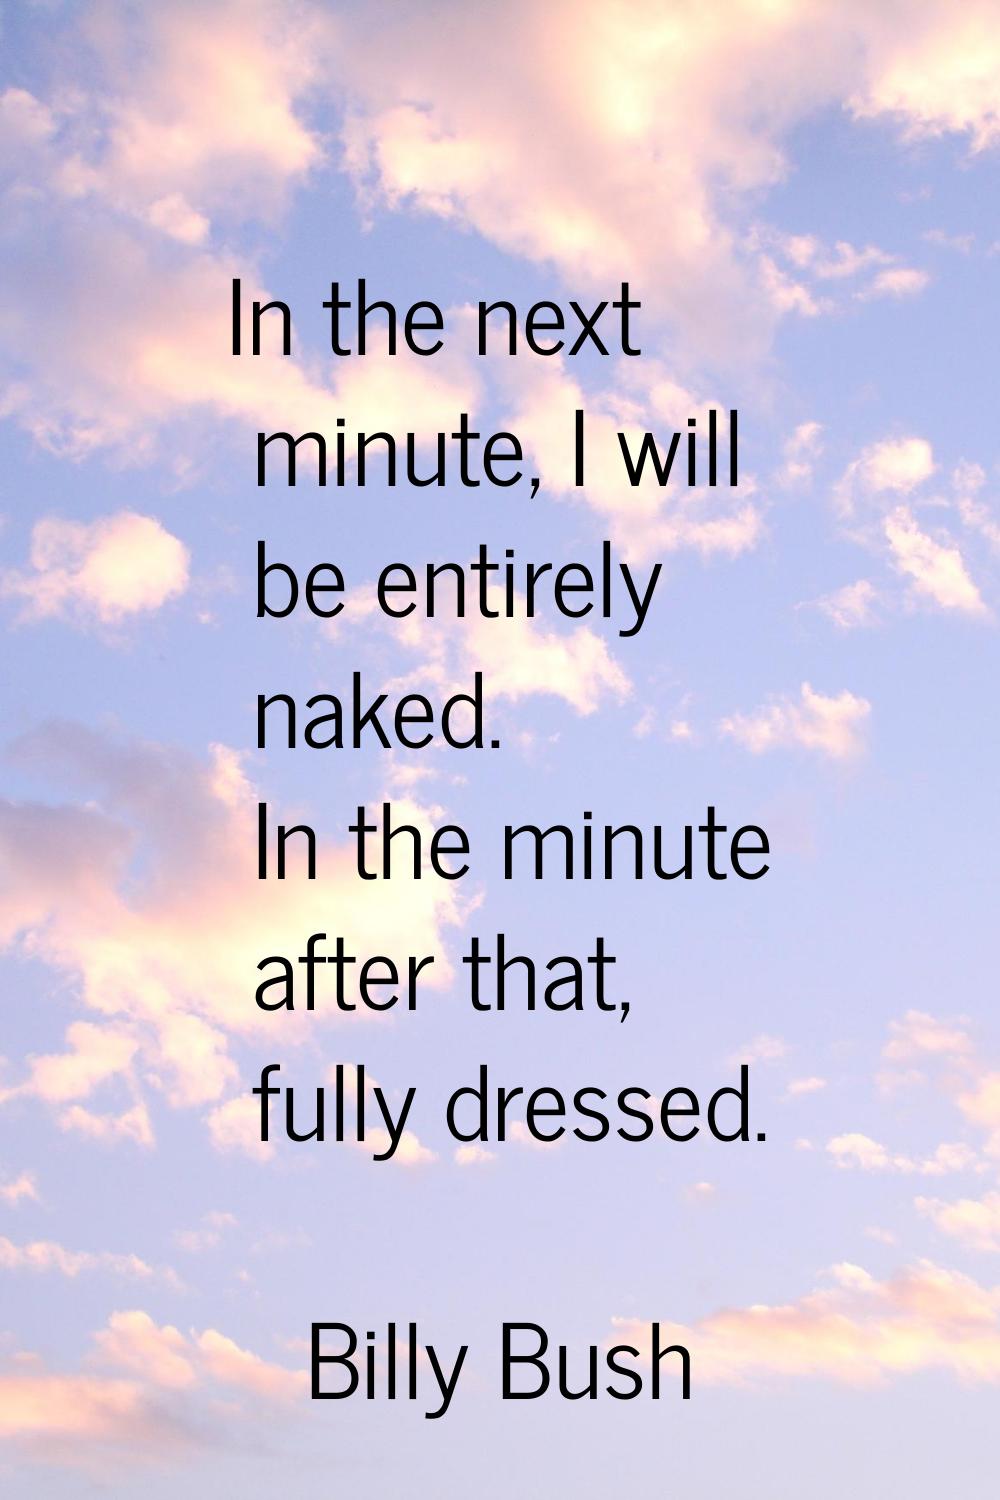 In the next minute, I will be entirely naked. In the minute after that, fully dressed.